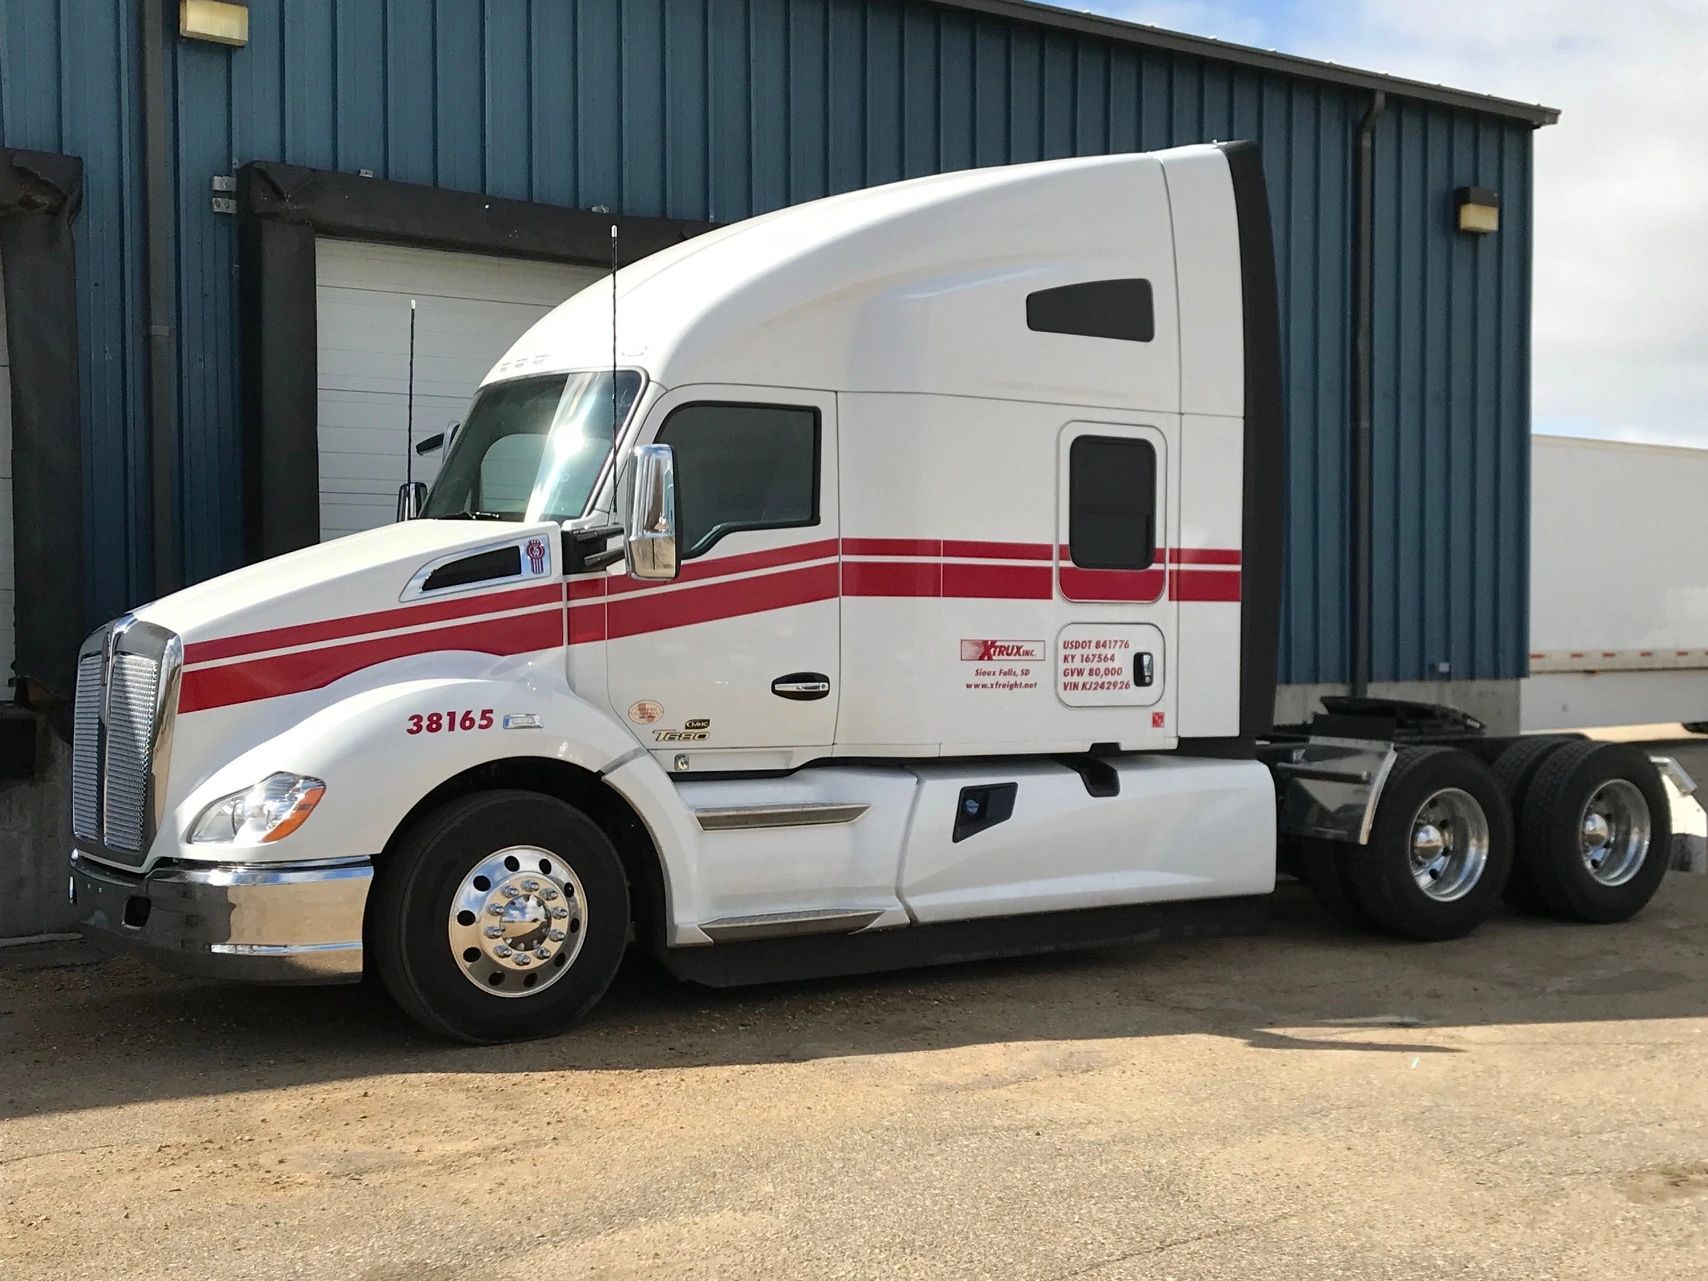 Sioux Falls Trucking Jobs Provider XFreight Shares A White Truck Cab With Red Stripes Outside